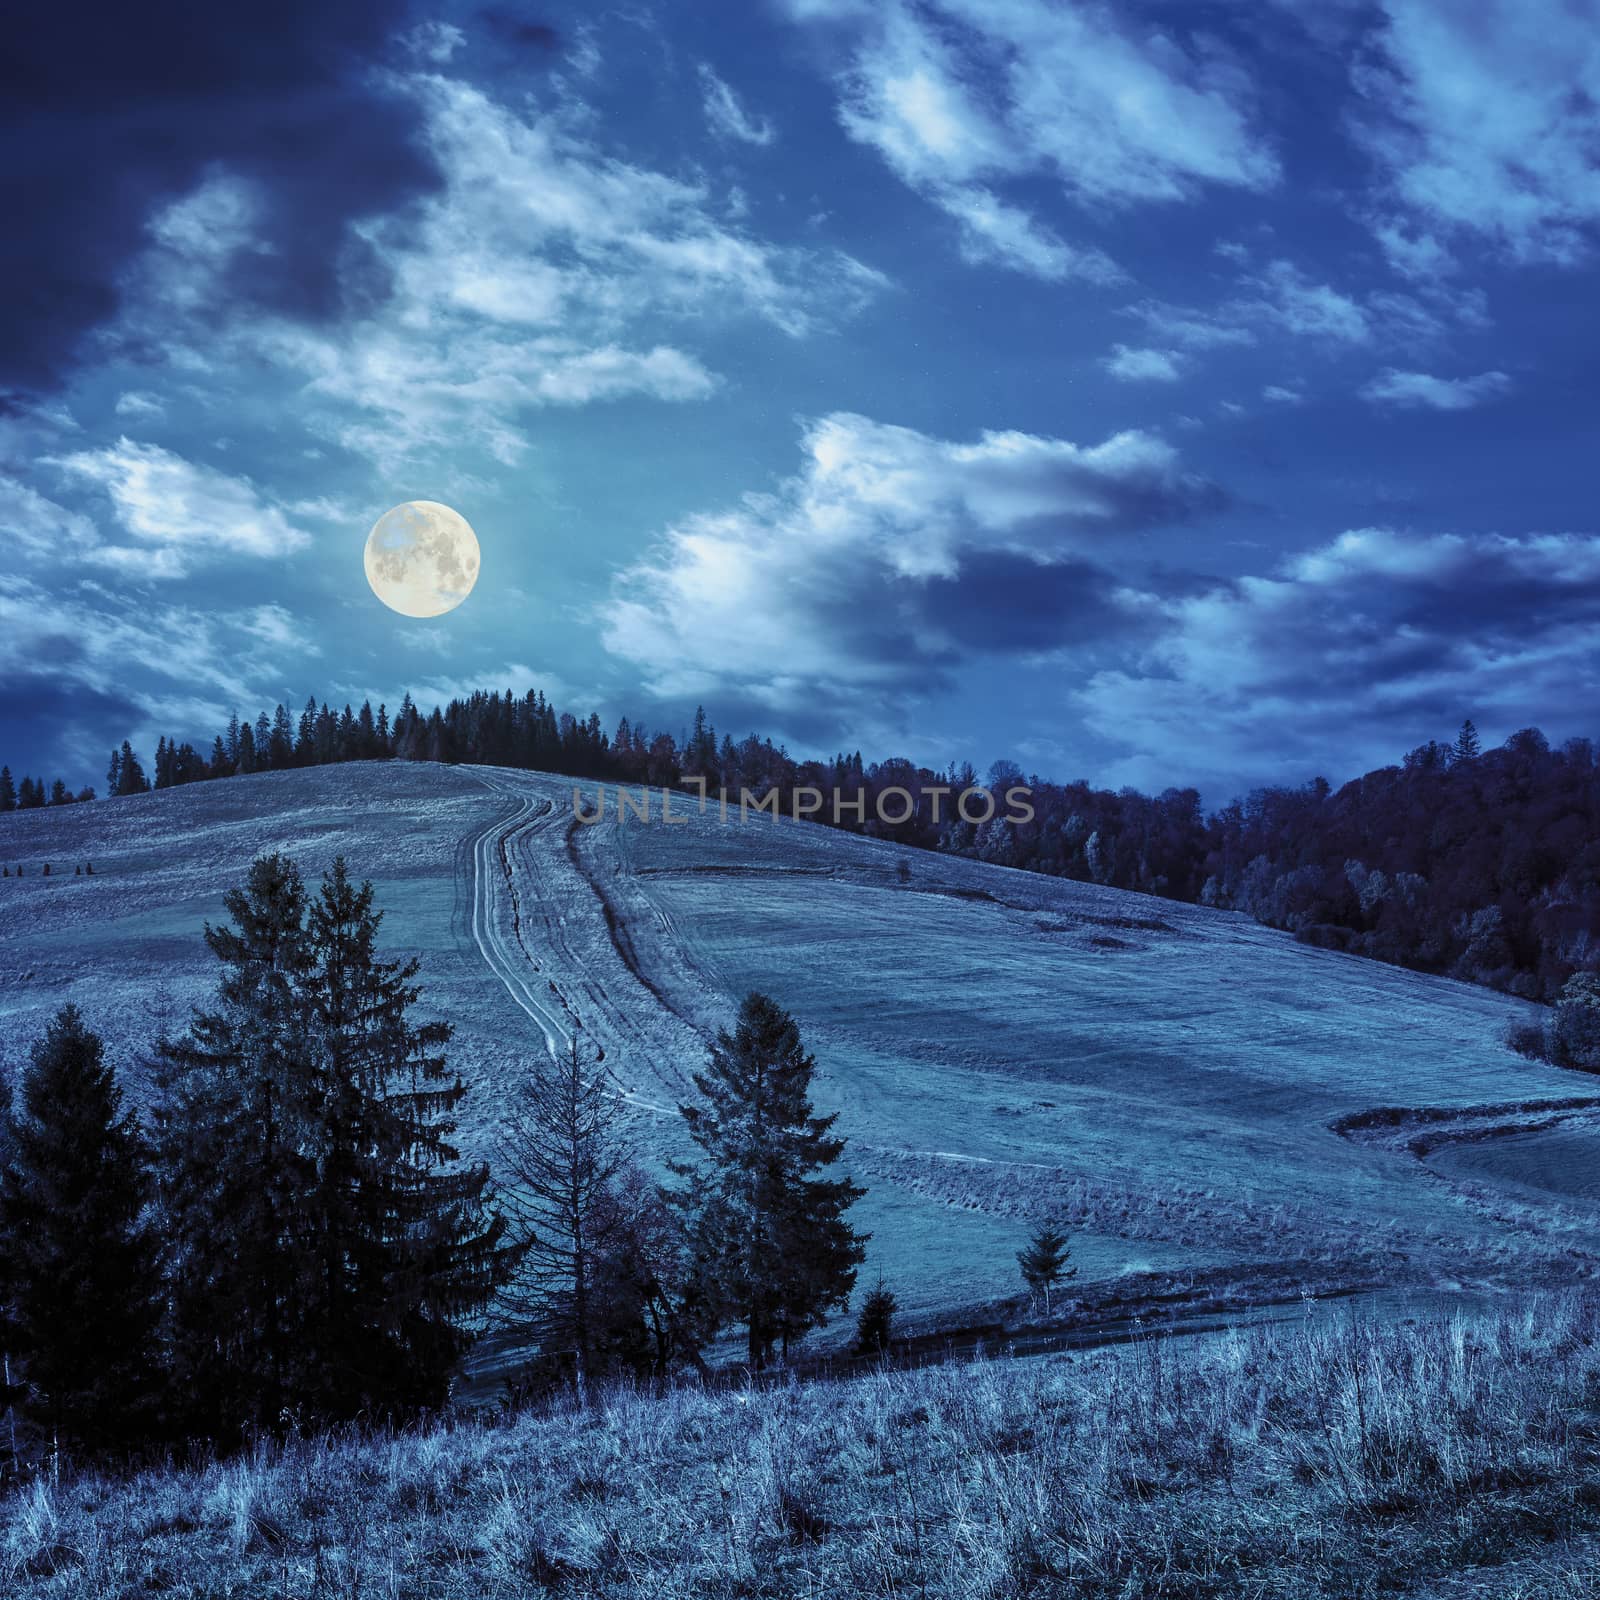 pine trees and orange trees on autumn meadow in mountains at night in full moon light